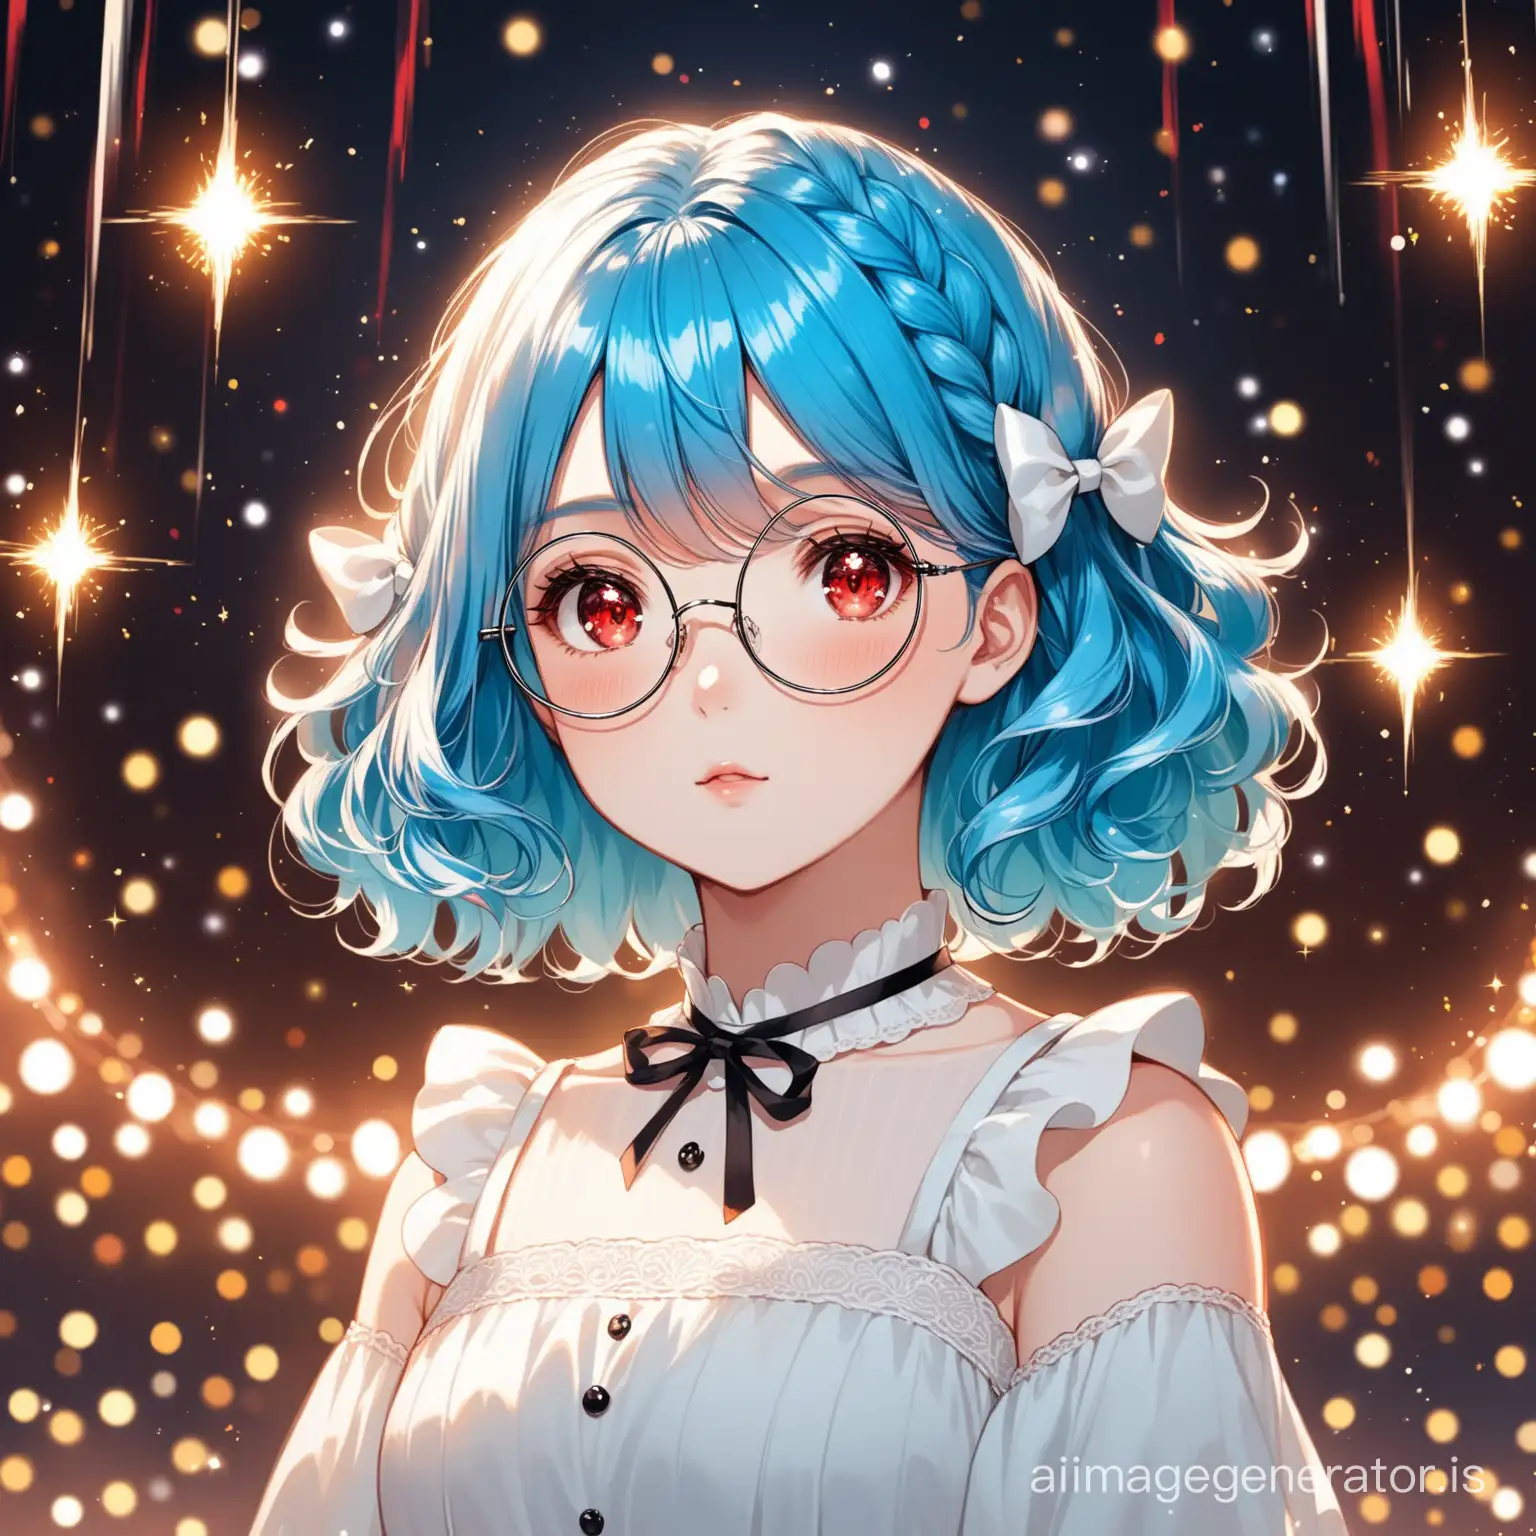 Ethereal-Girl-with-Blue-Hair-in-Monochrome-Elegance